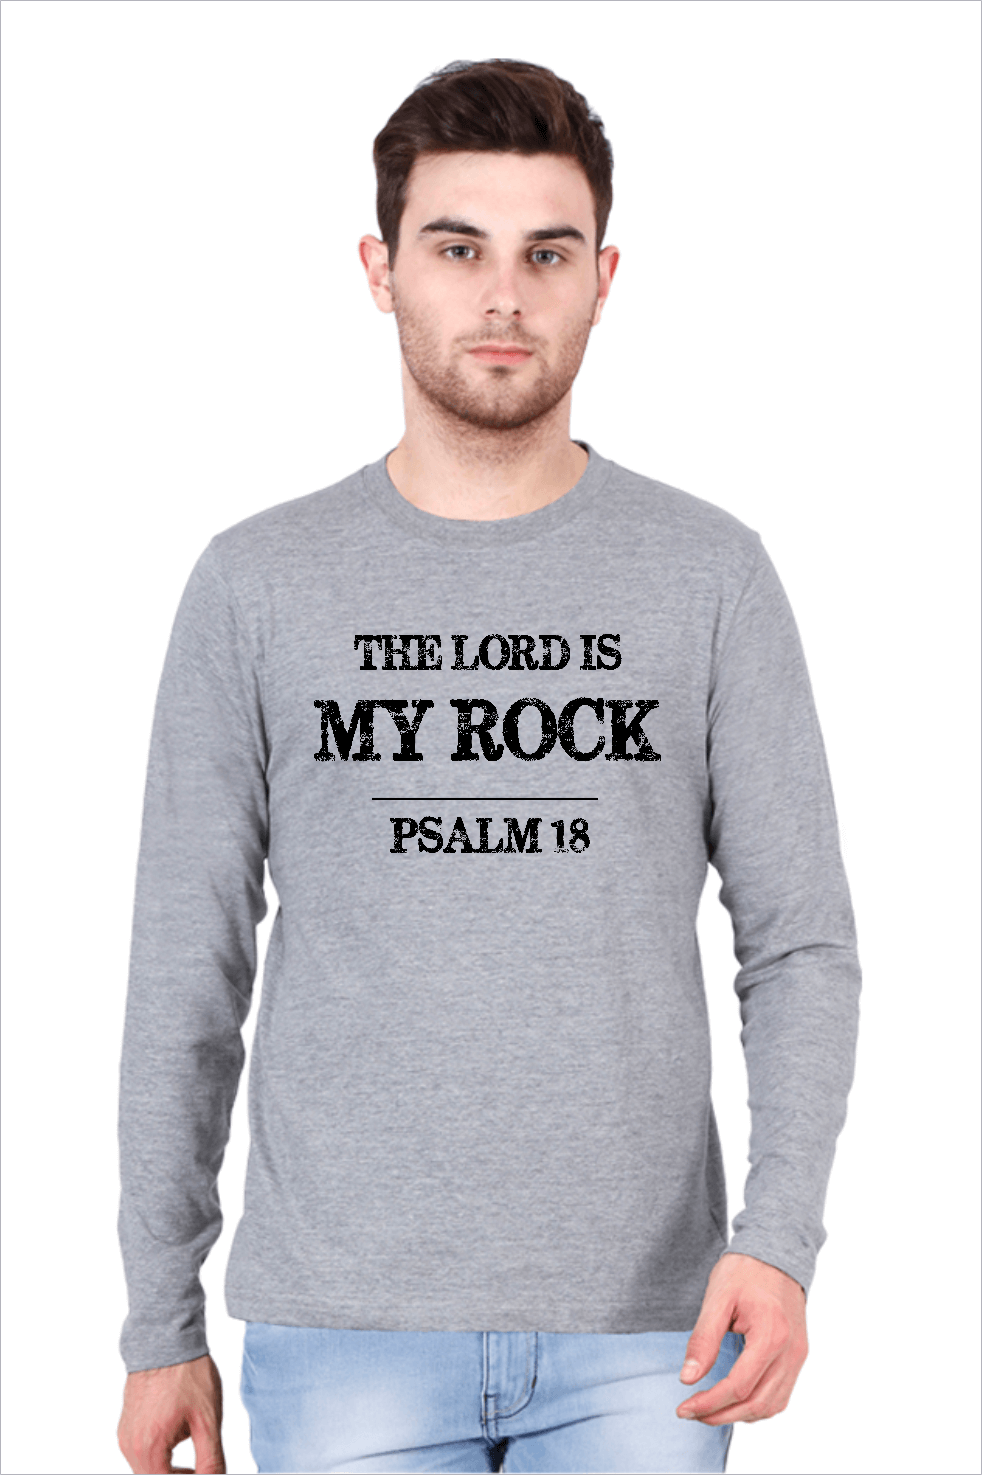 Living Words Men Round Neck T Shirt S / Grey The Lord is my Rock - Psalm 18